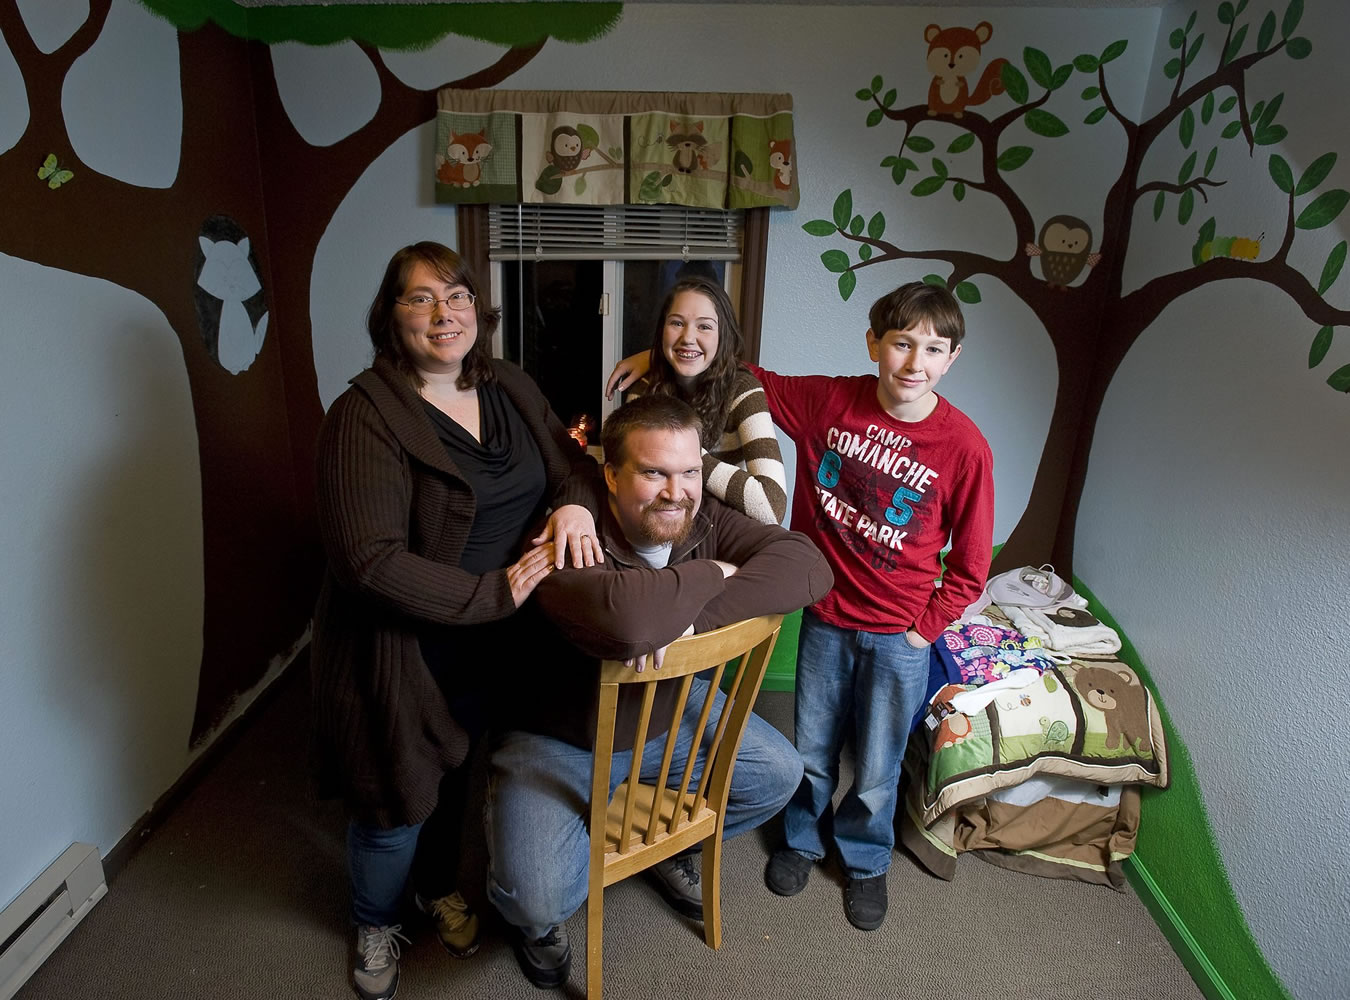 Mark and Rebecca Jenks pose for a portrait with Rebecca's children, Tamara Emler, 15, and Brandon Emler, 13, inside a room prepared for their adopted baby.